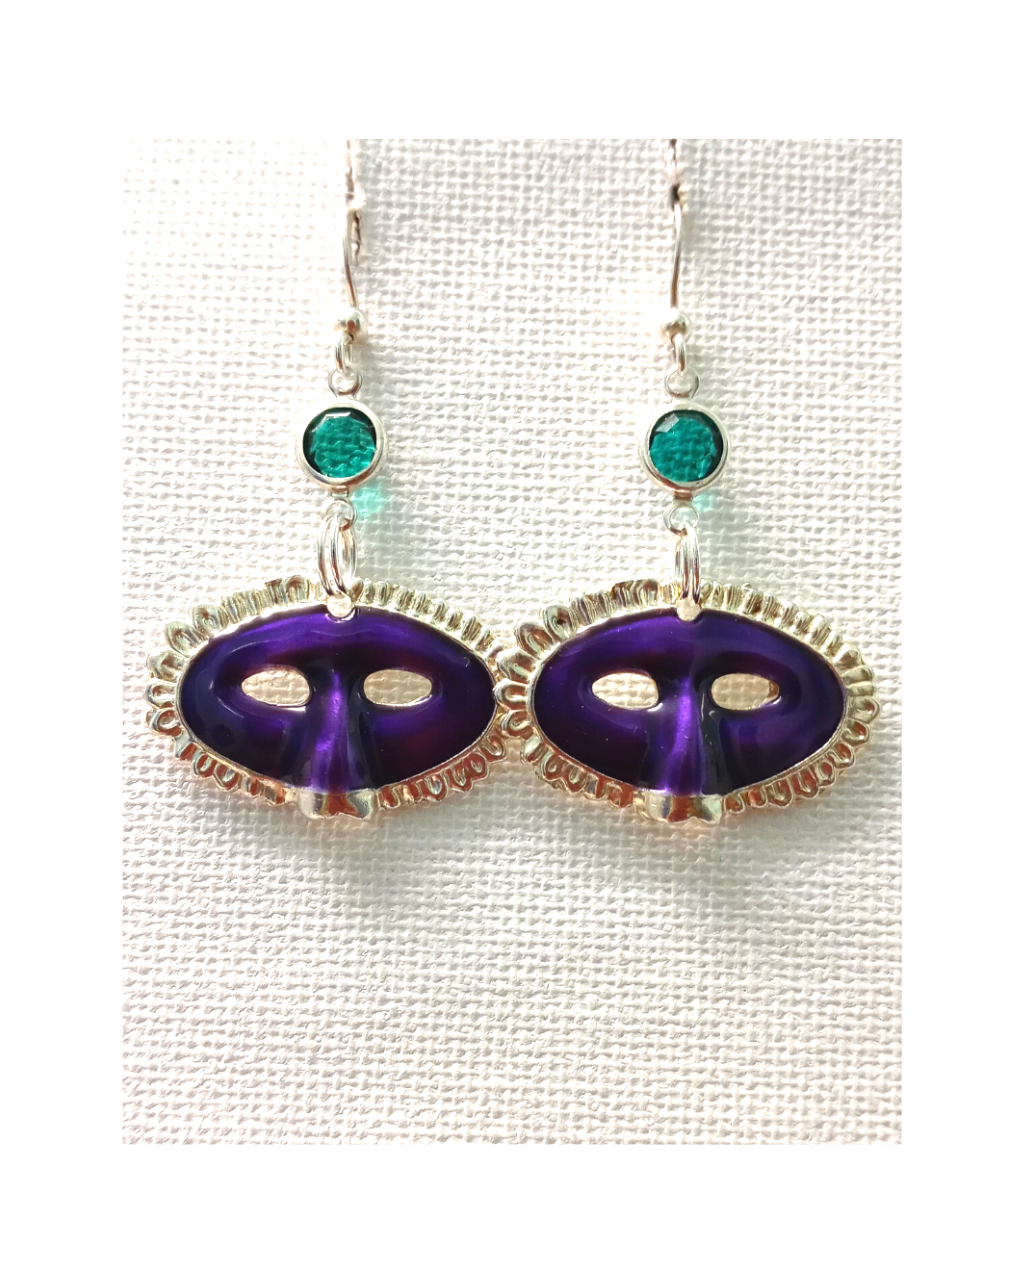 Mardi Gras Purple Hand-enameled Mask with Swarovski Green Crystals Sterling Earrings 1 15/16"L X 1 1/8"W ONE ONLY